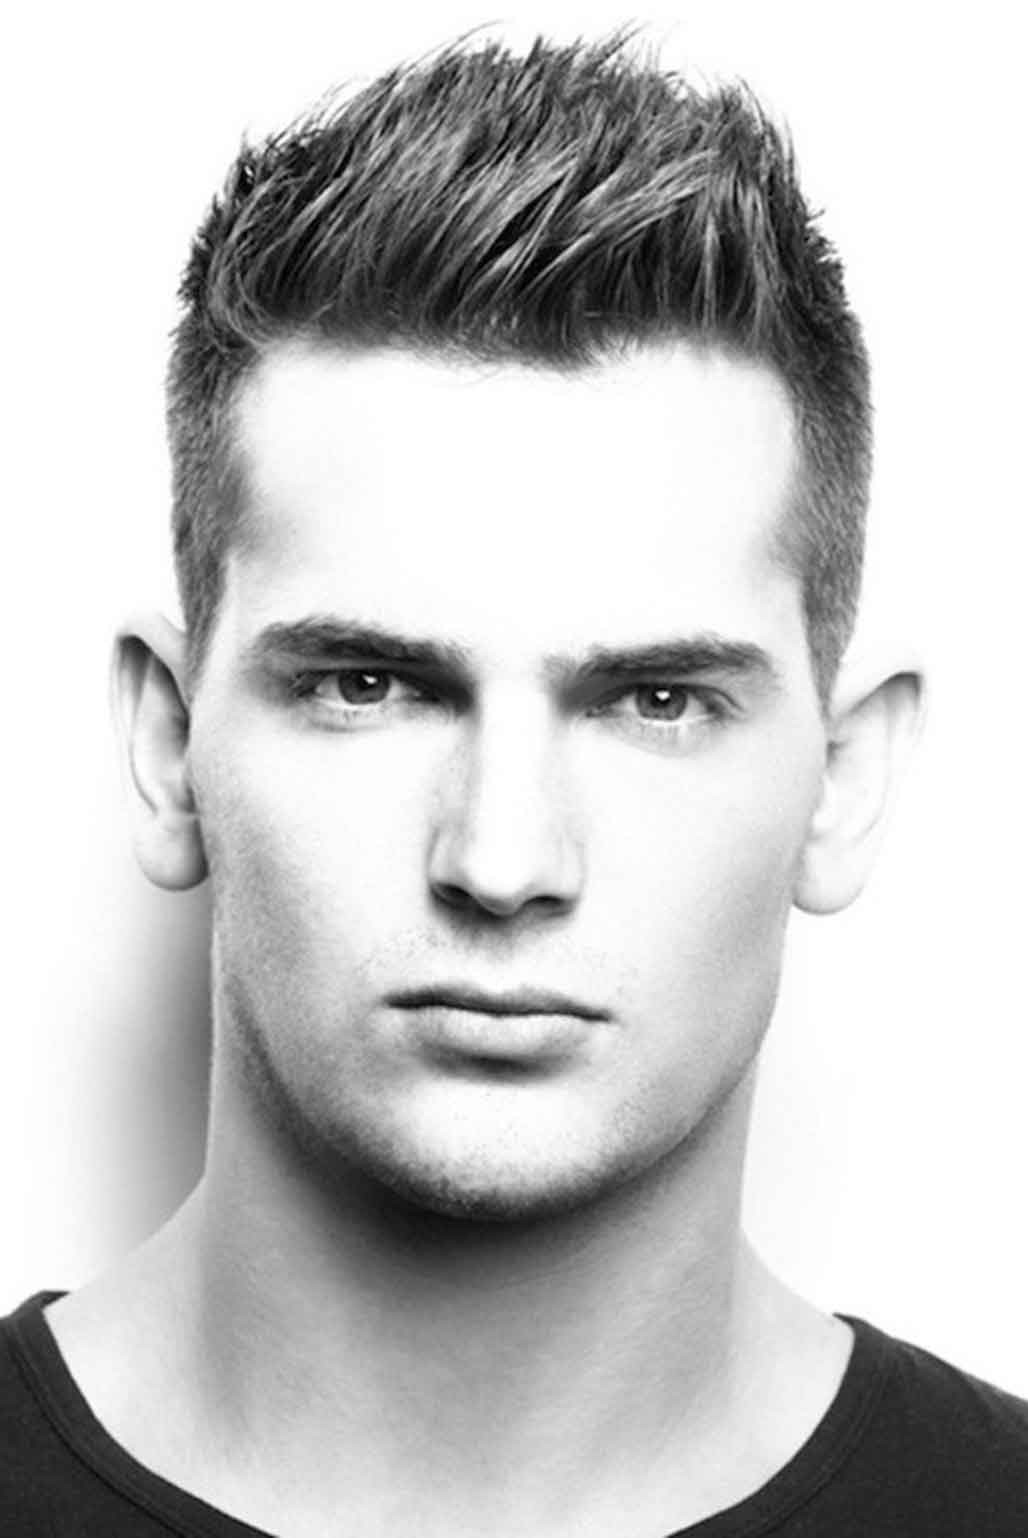 Haircuts For Square Faces Male
 Hairstyle For Square Face Male Black Wavy Haircut